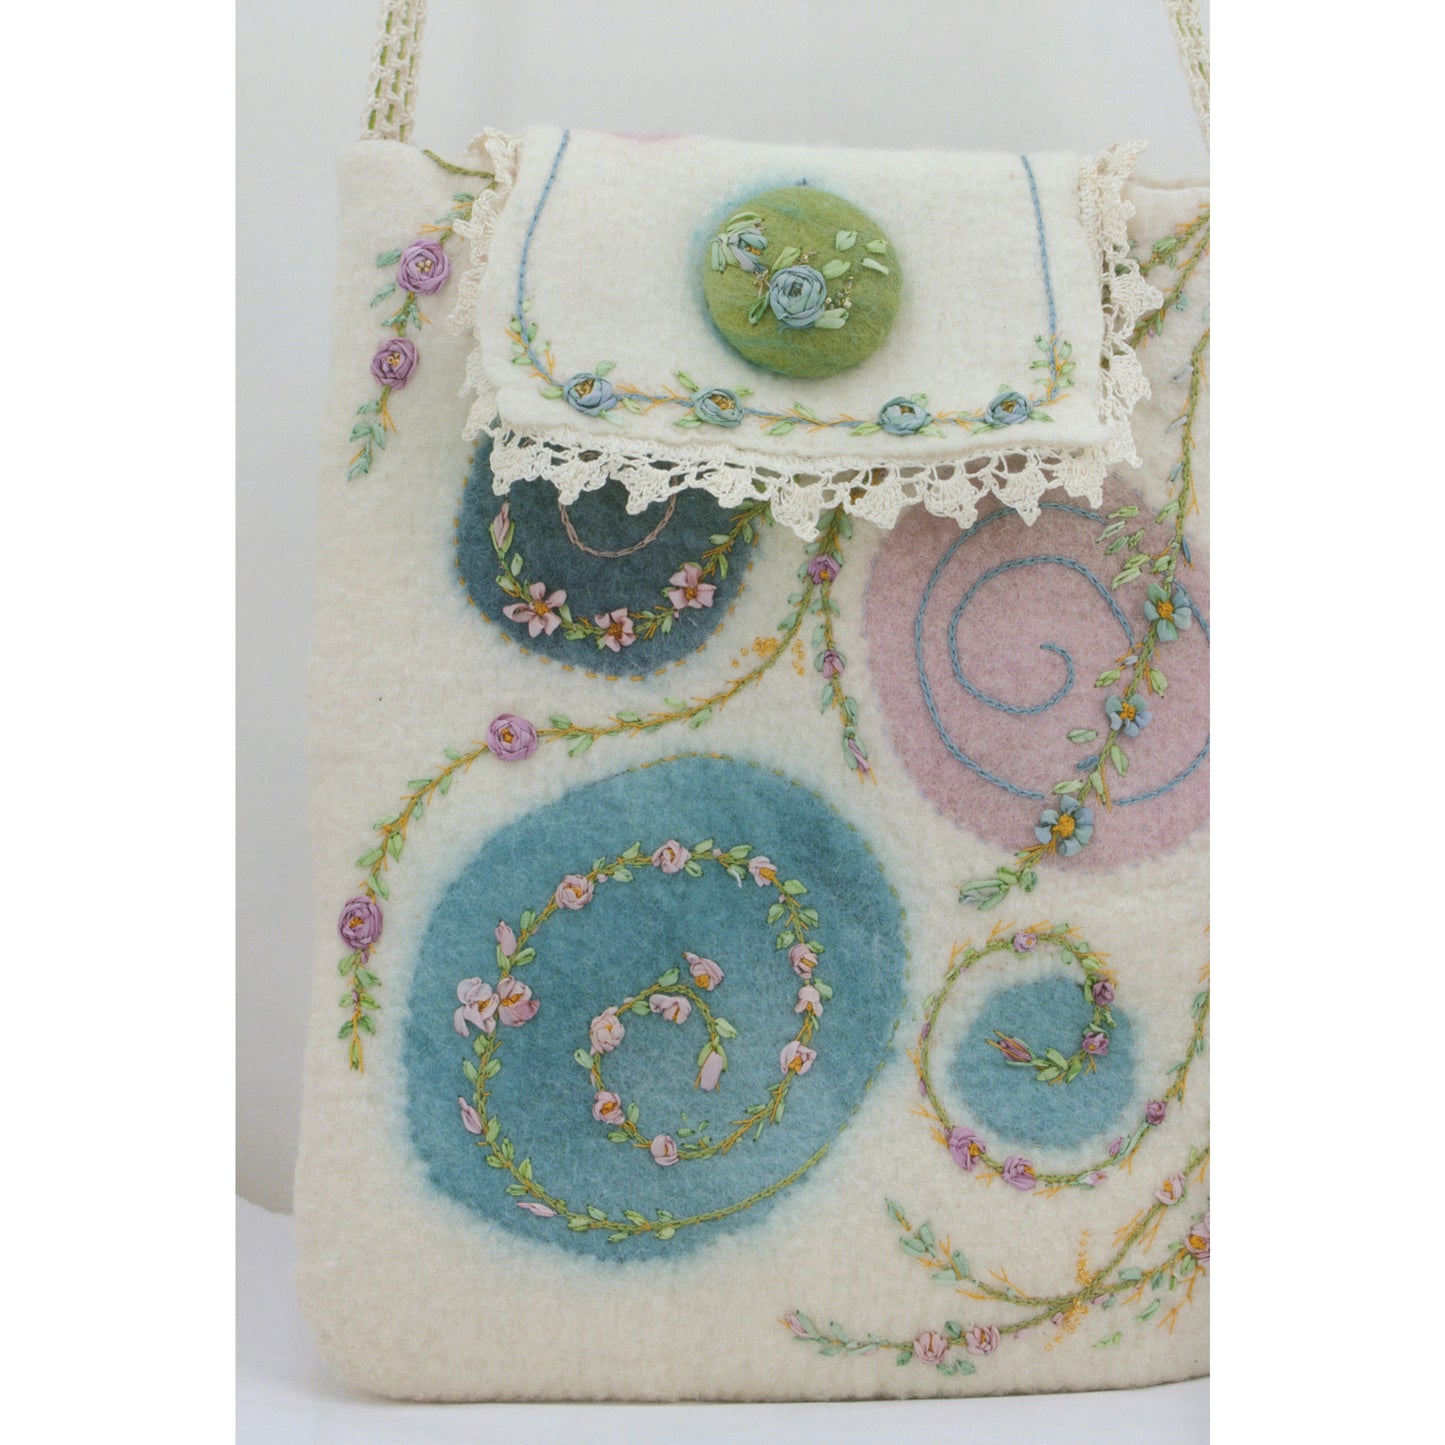 The Art of Felting & Silk Ribbon Embroidery